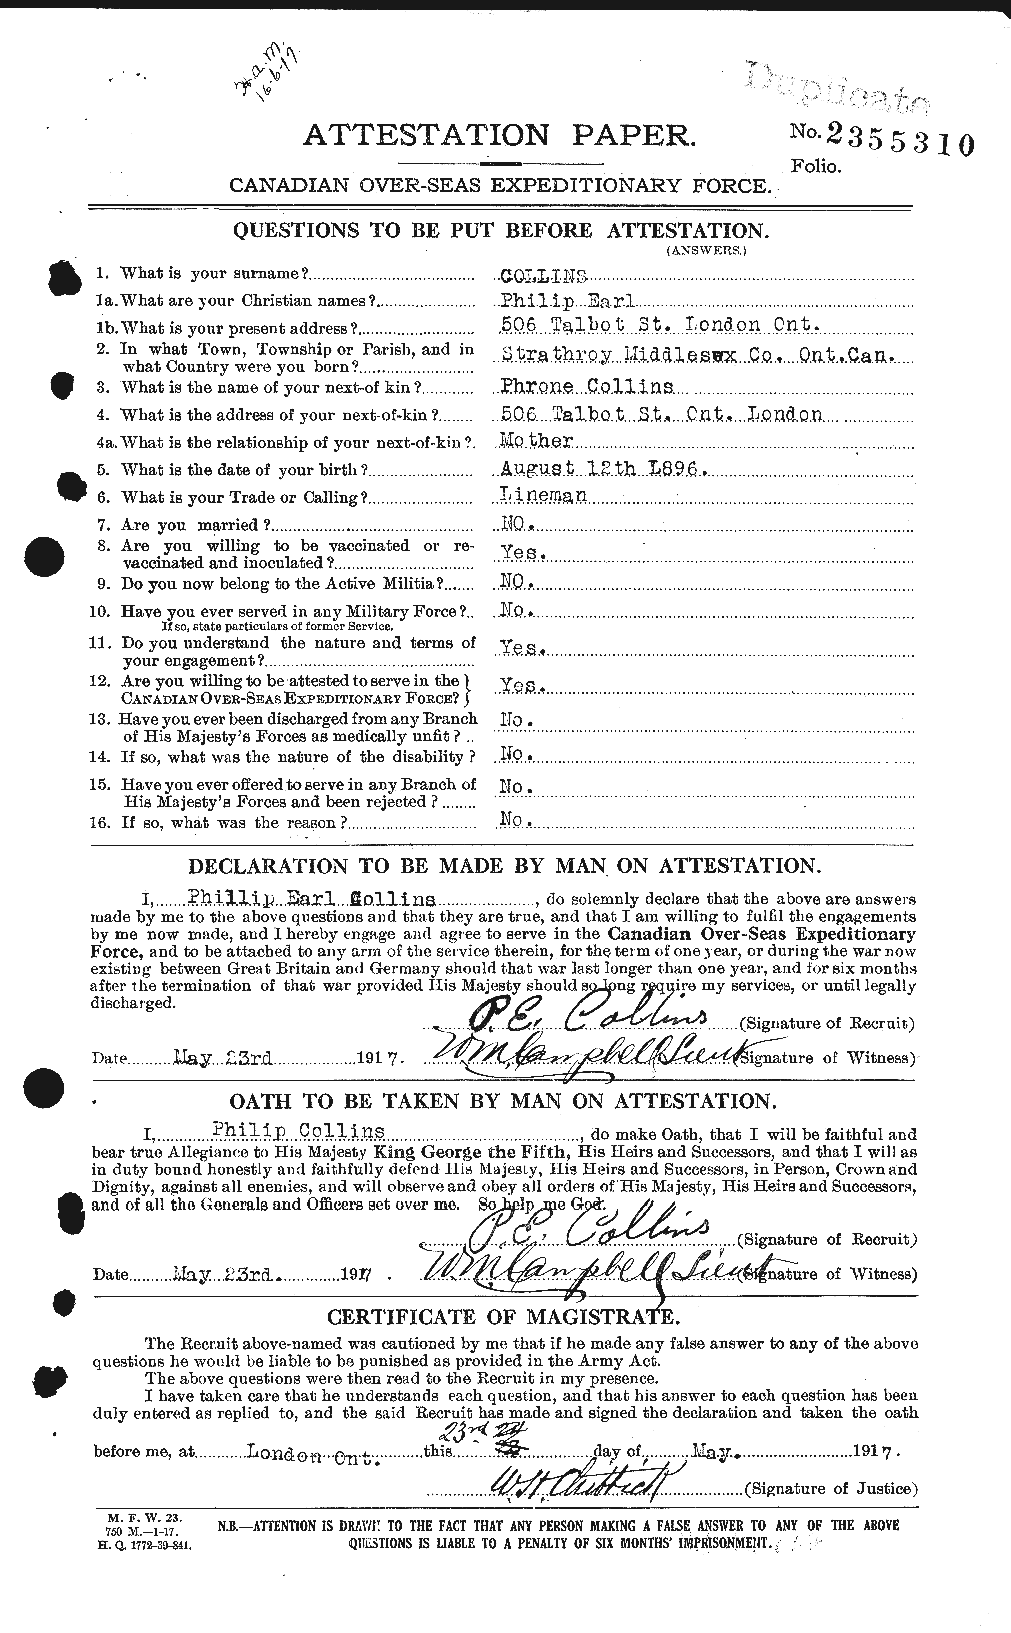 Personnel Records of the First World War - CEF 069292a